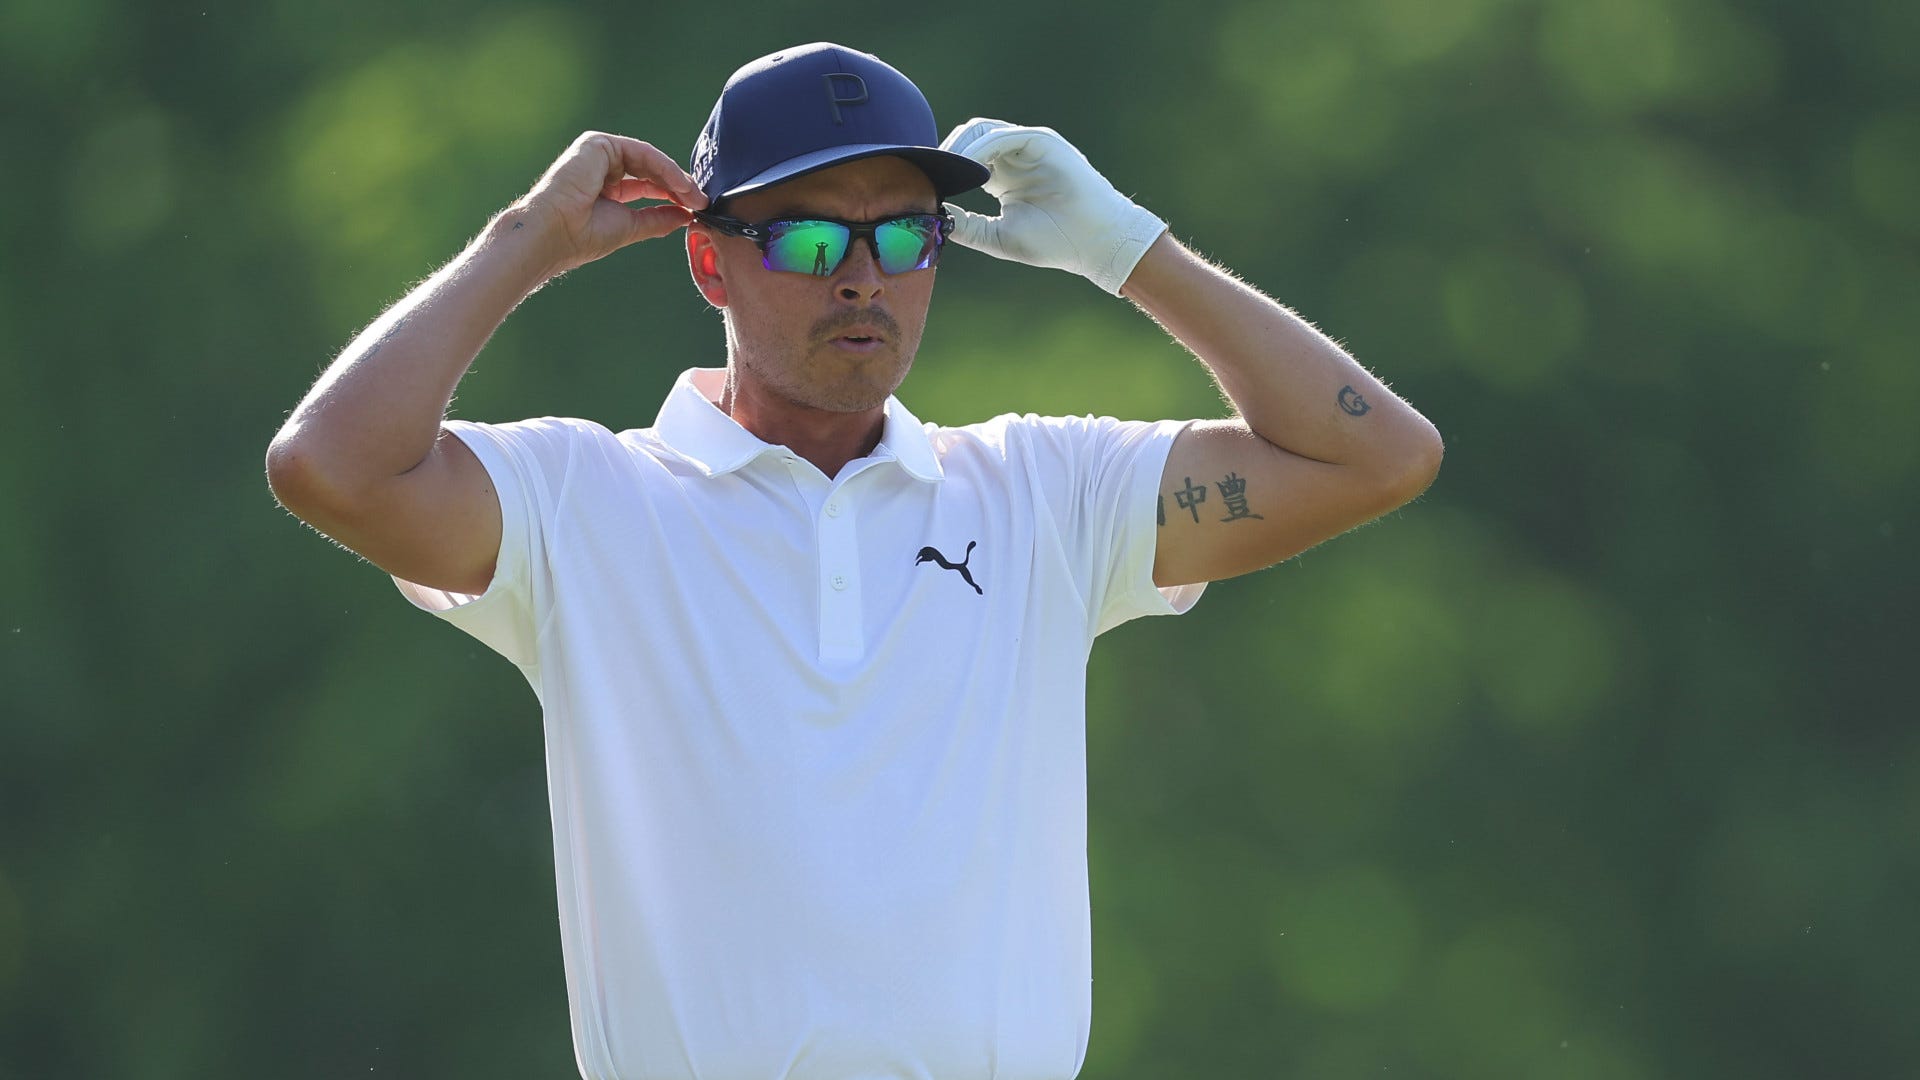 Rickie Fowler still open to investing in Premier League as golf star explains why he snubbed Leeds stake Goal